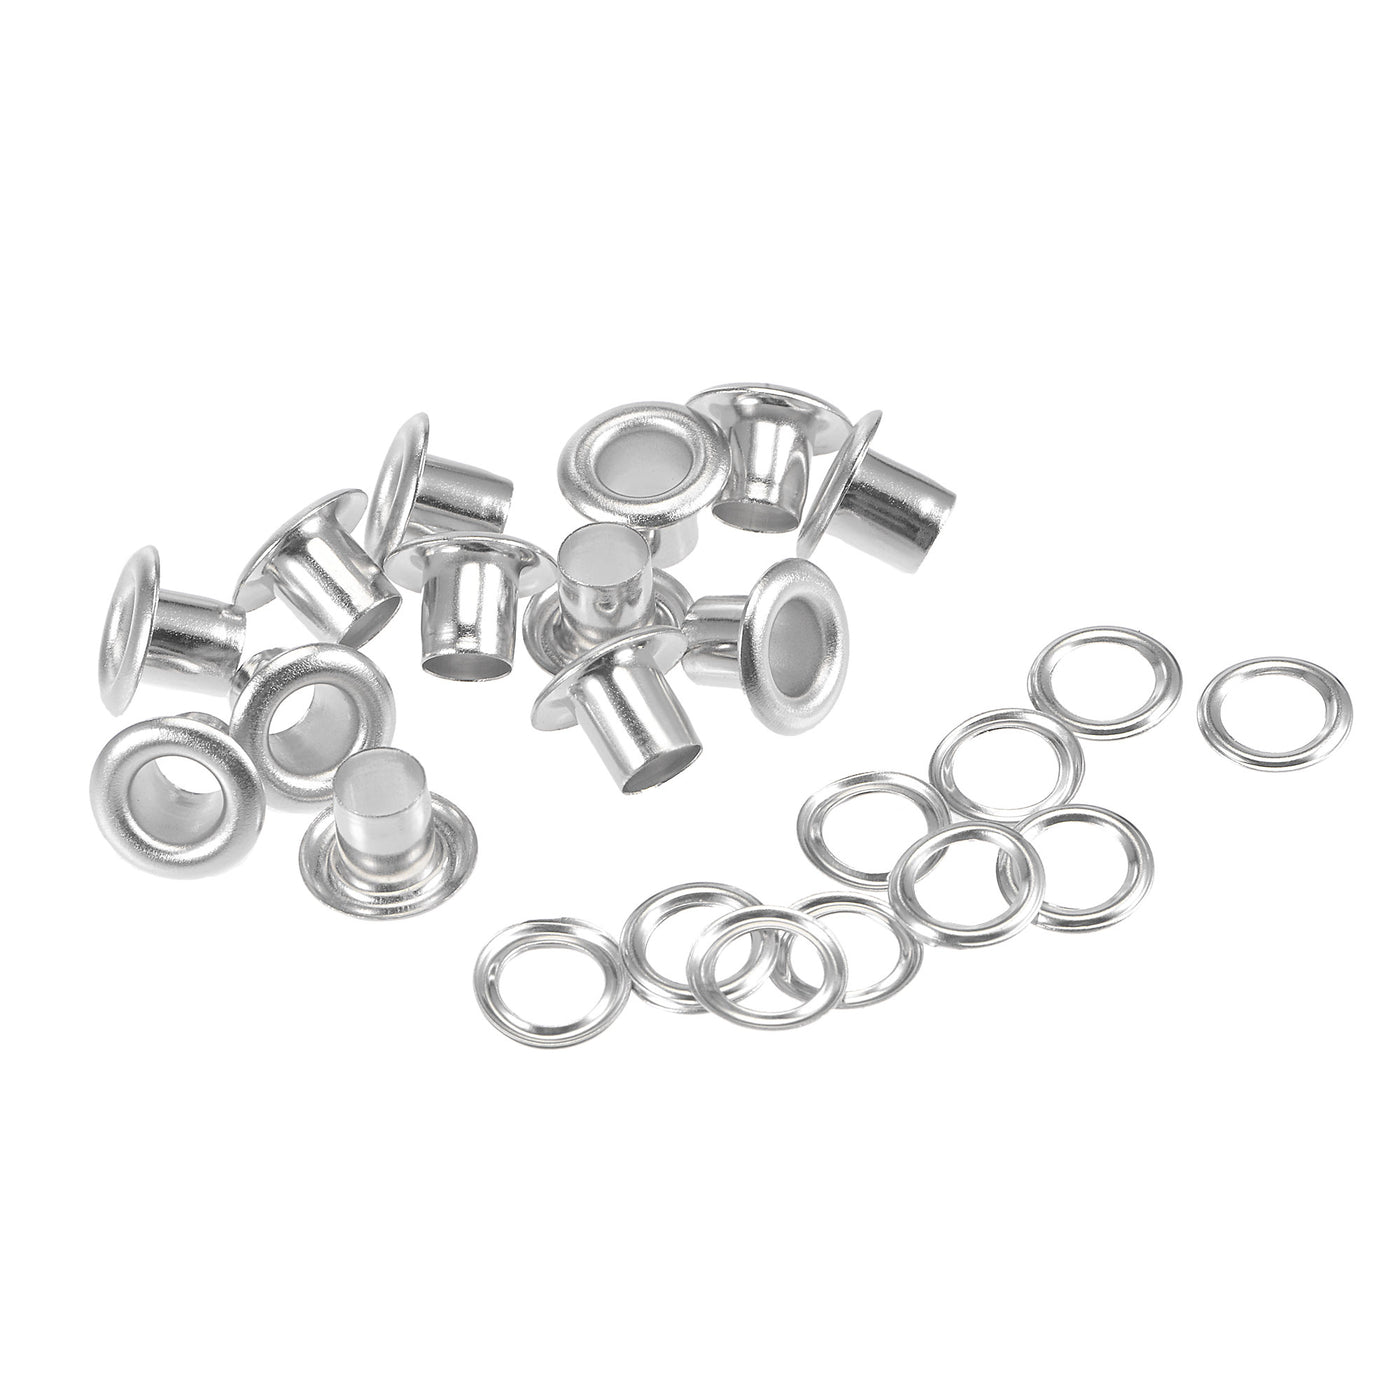 uxcell Uxcell Eyelet with Washer 10x5x7mm Alloy Grommet Silver Tone 200 Set